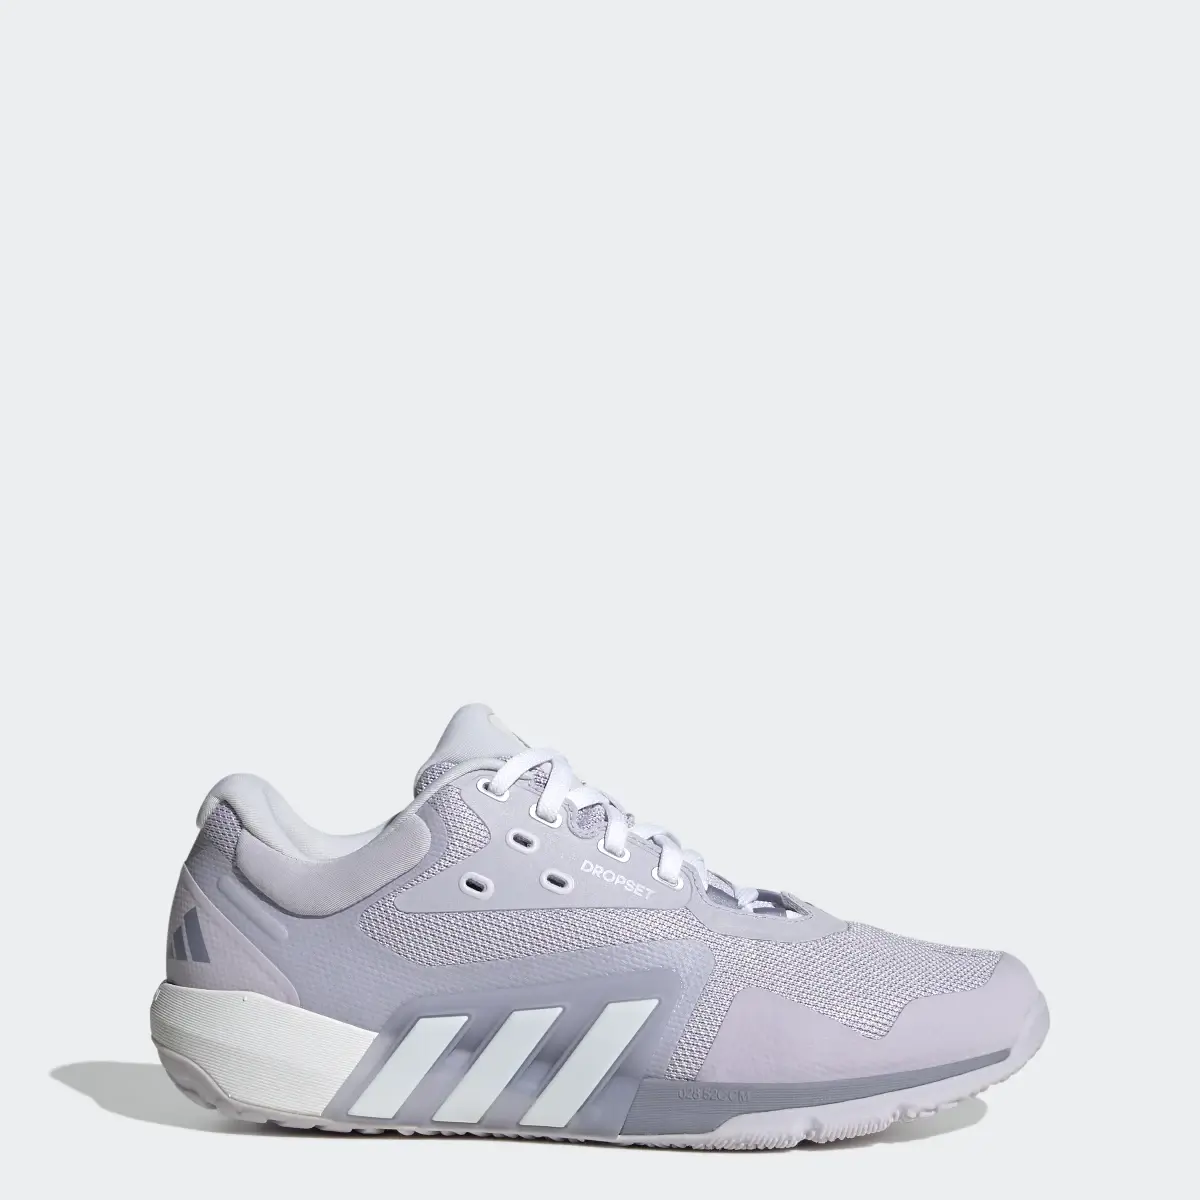 Adidas Dropset Trainer Shoes. 1